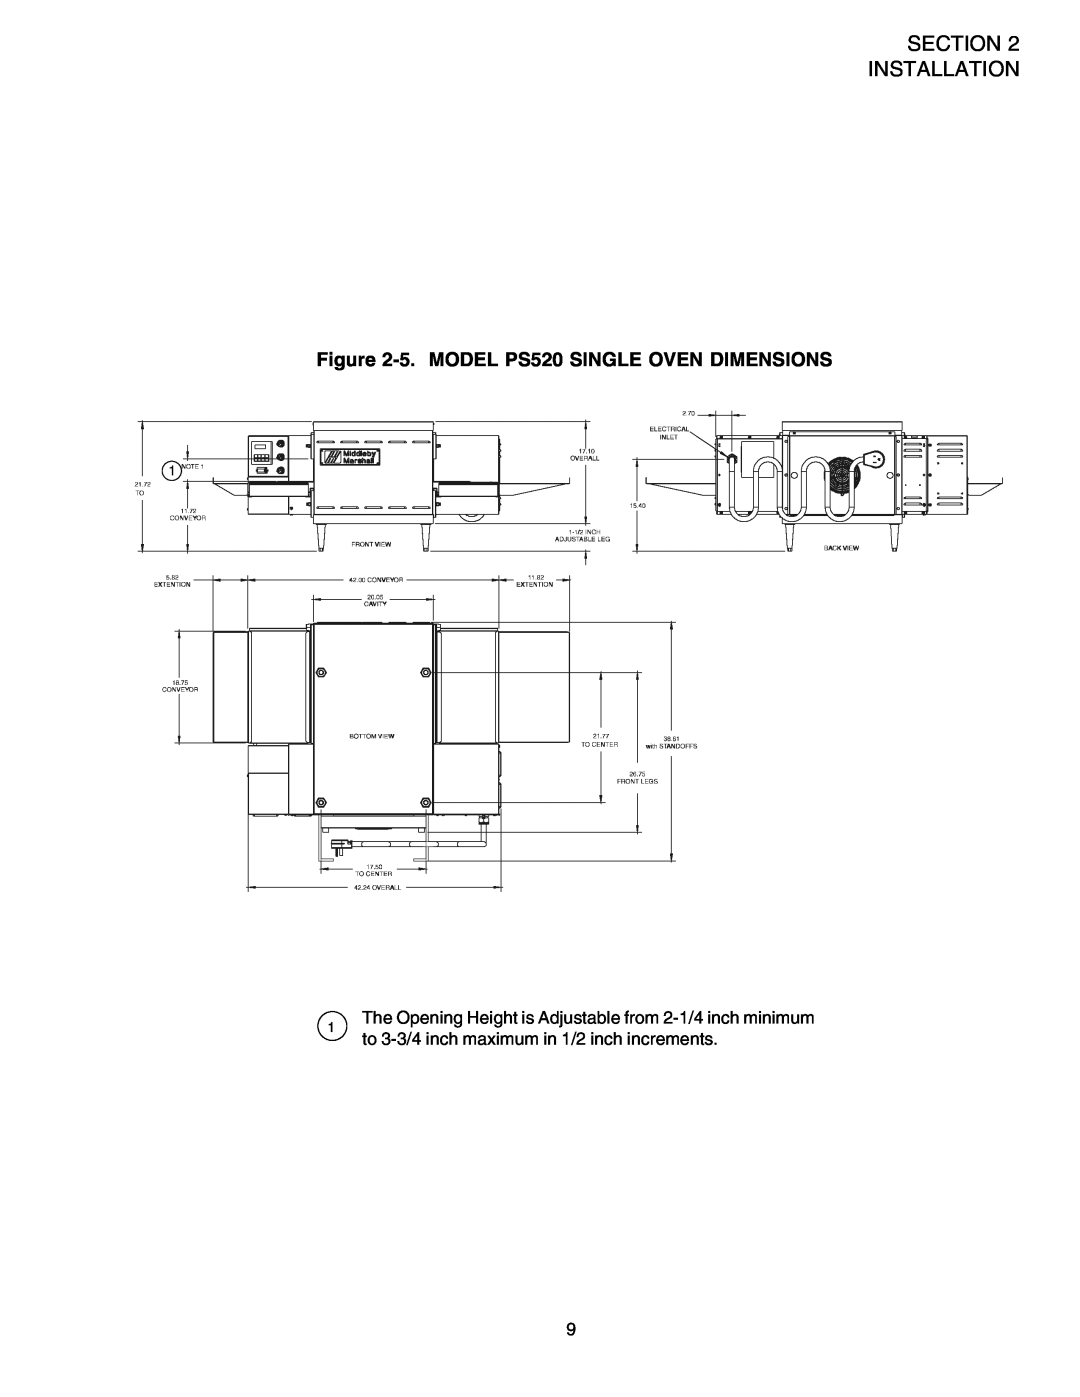 Middleby Marshall installation manual Section Installation, 5.MODEL PS520 SINGLE OVEN DIMENSIONS 